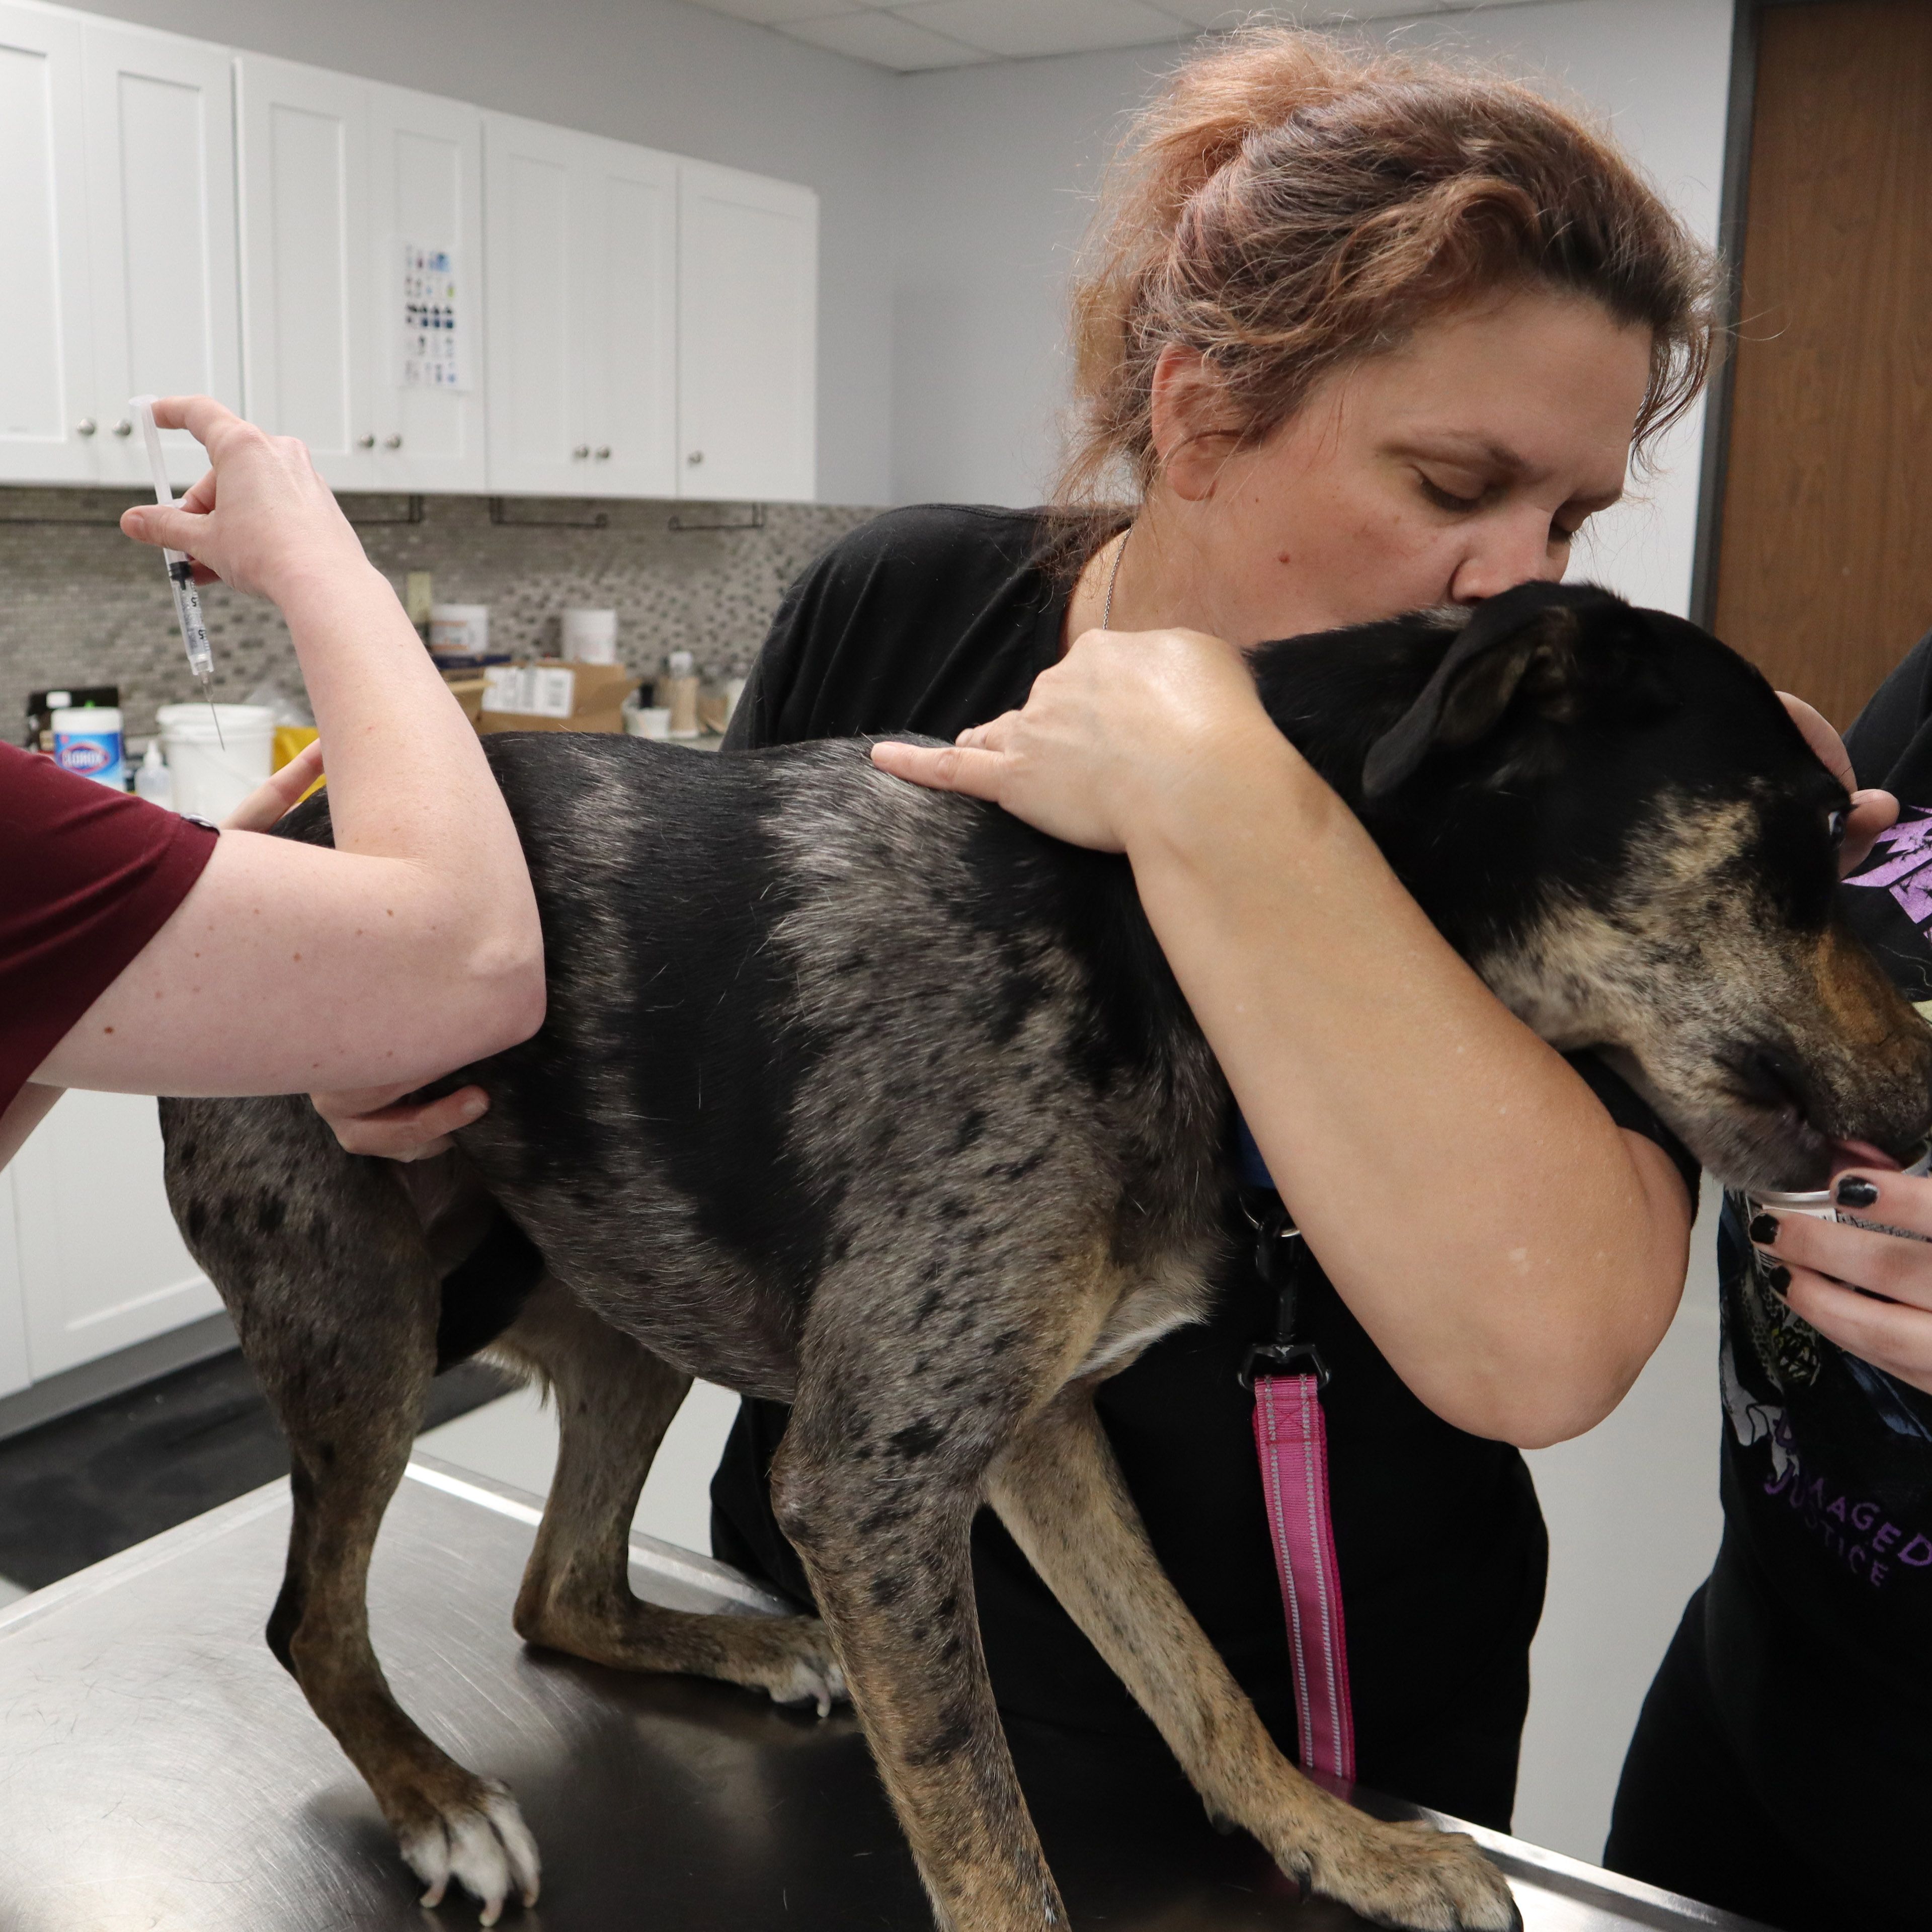 Volunteers at Houston Pets Alive shelter calming down a dog getting a shot.